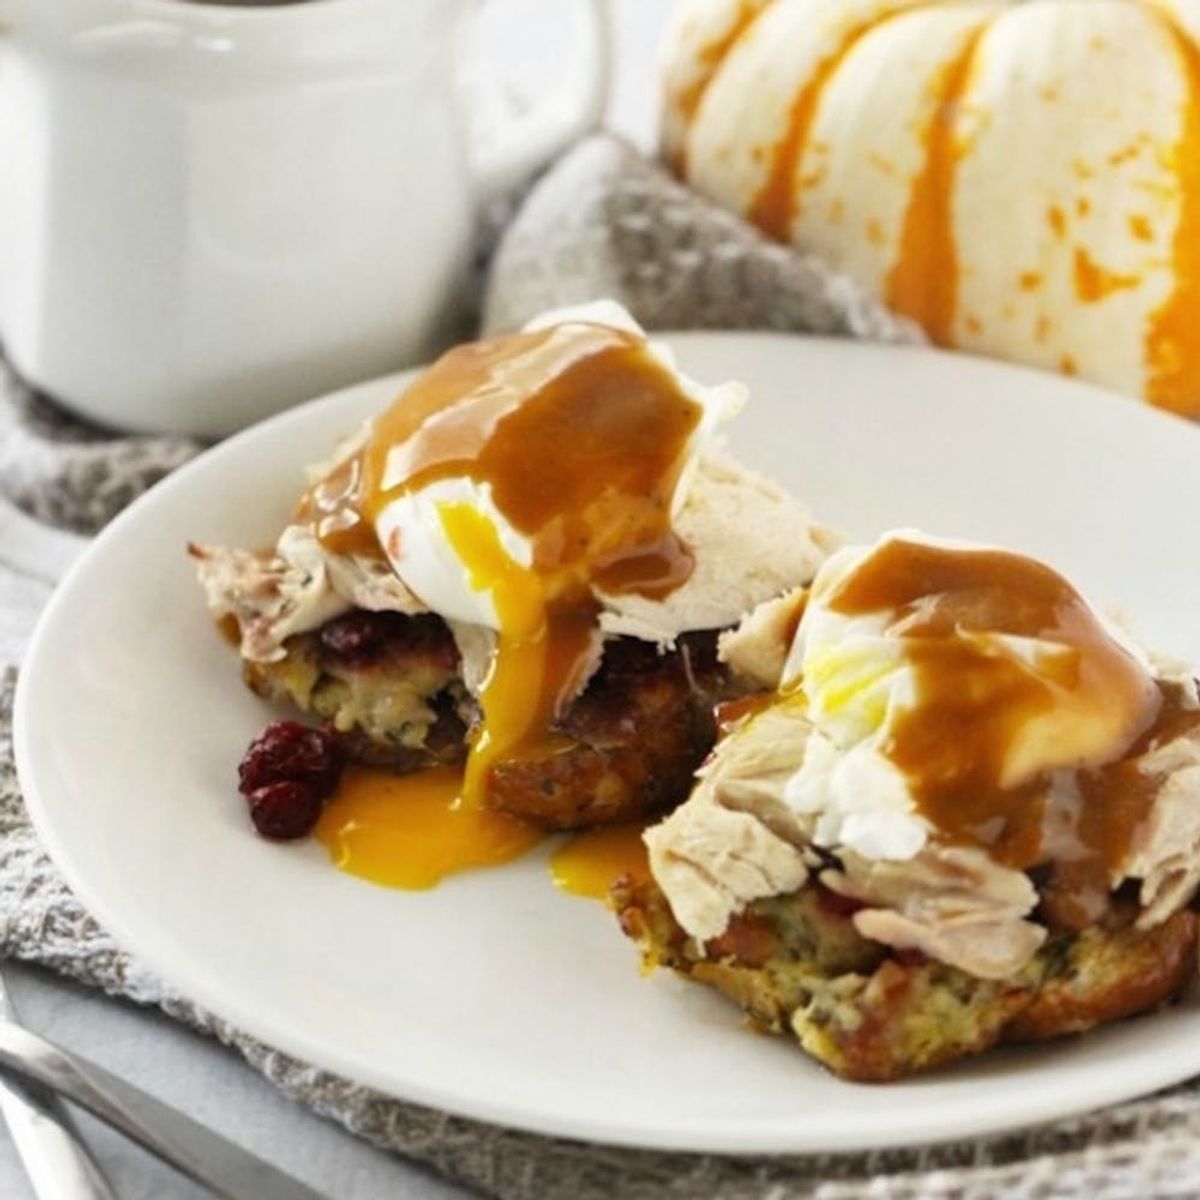 15 Ways to Eat Thanksgiving Leftovers That Aren’t Just Sandwiches